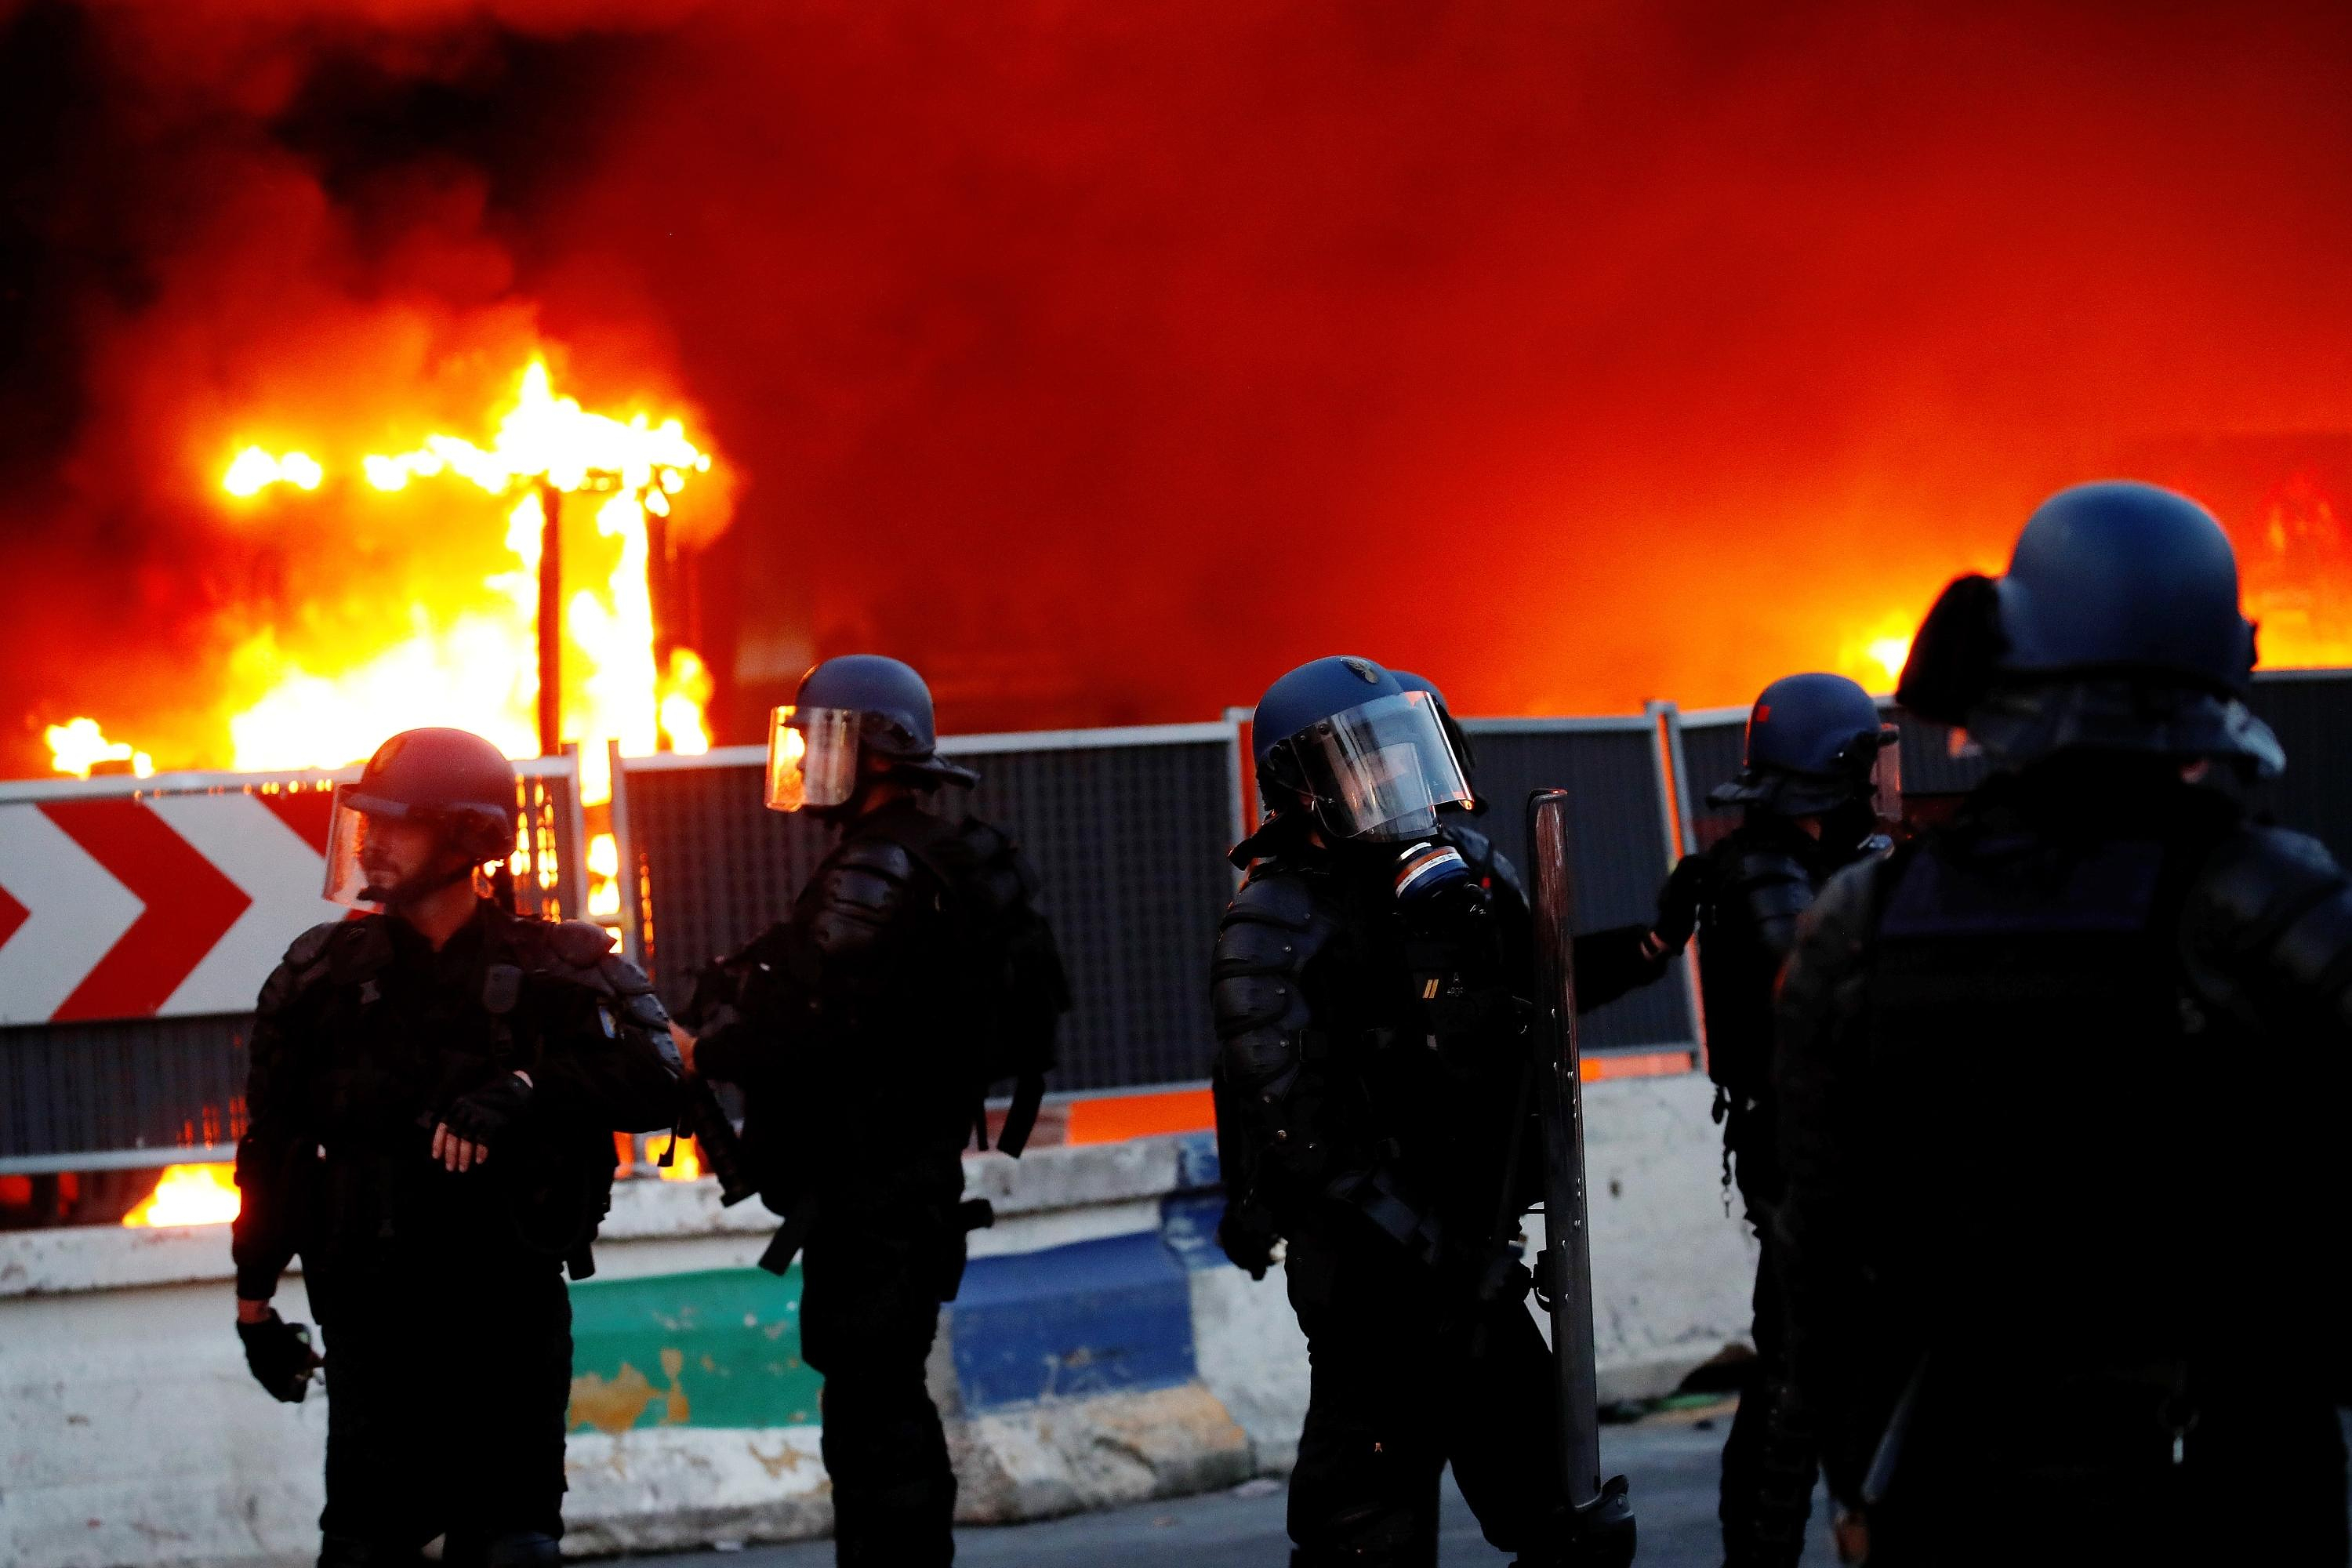 A report recommends the creation of a “riot fund” to cover communities